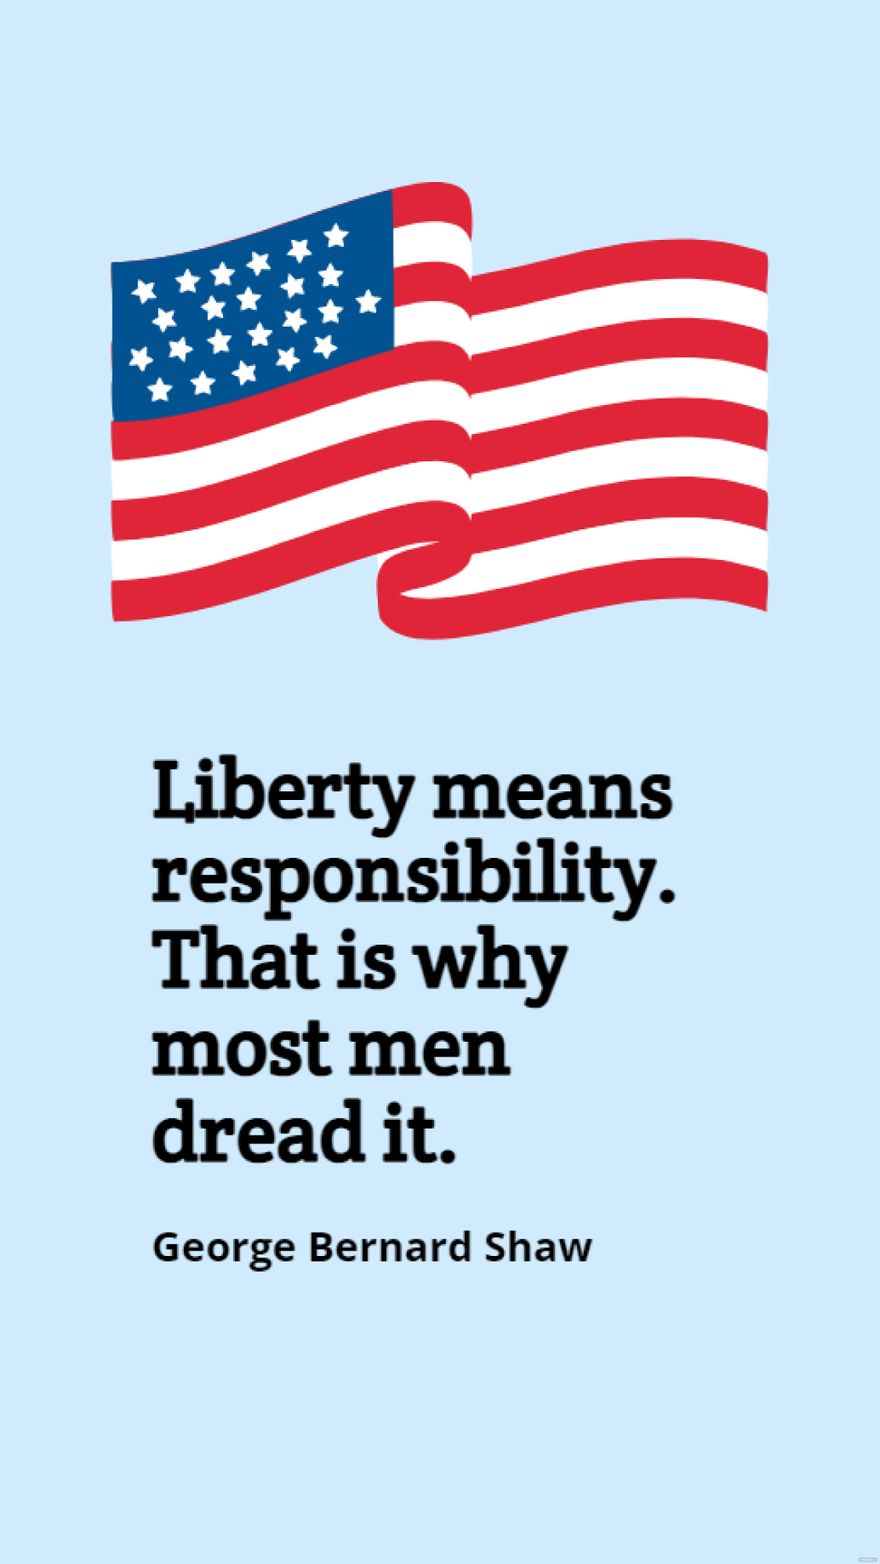 Free George Bernard Shaw - Liberty means responsibility. That is why most men dread it.